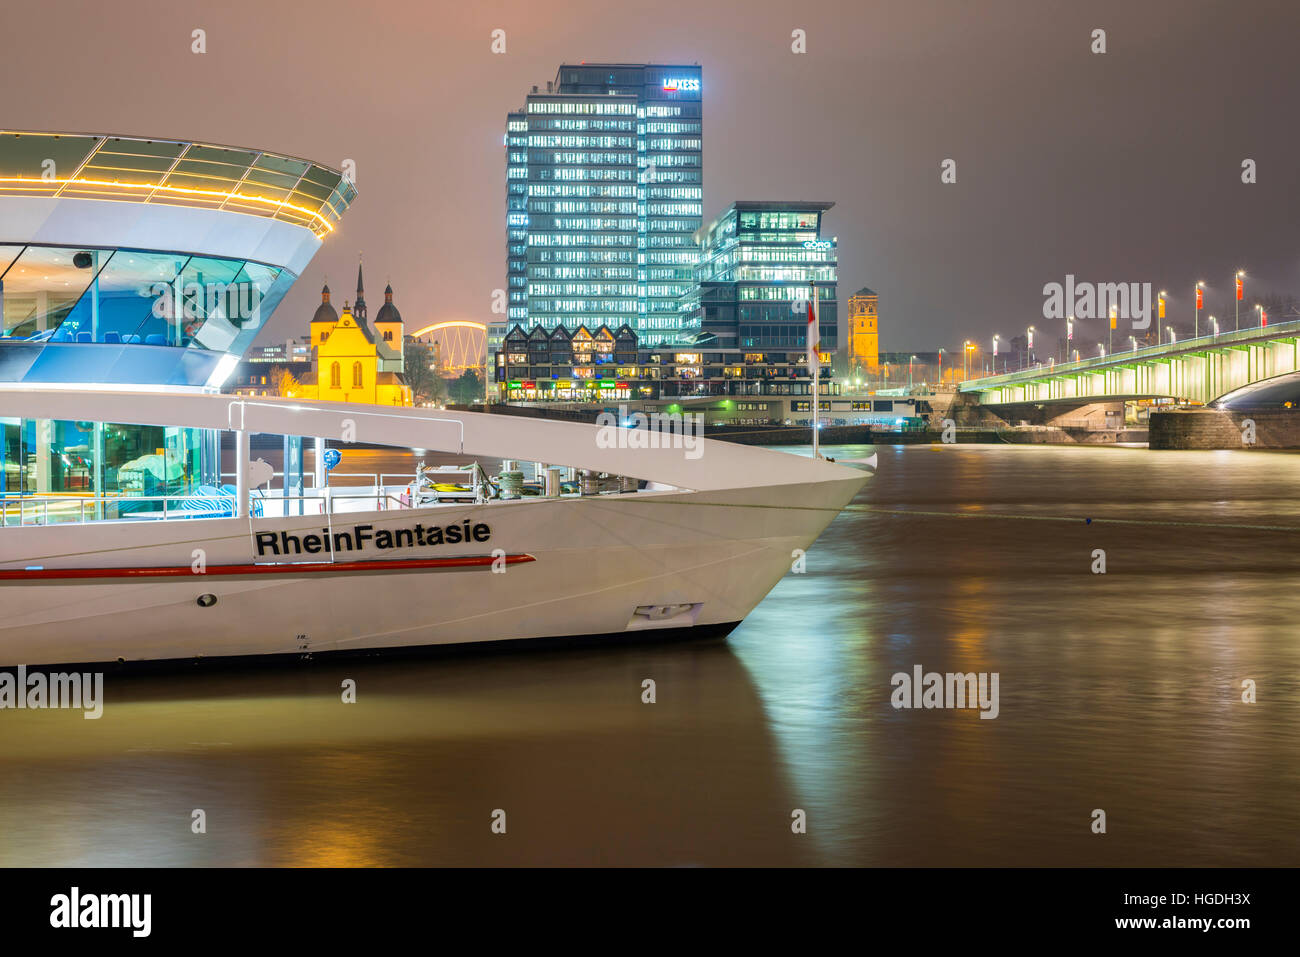 tour boat in Cologne by night Stock Photo